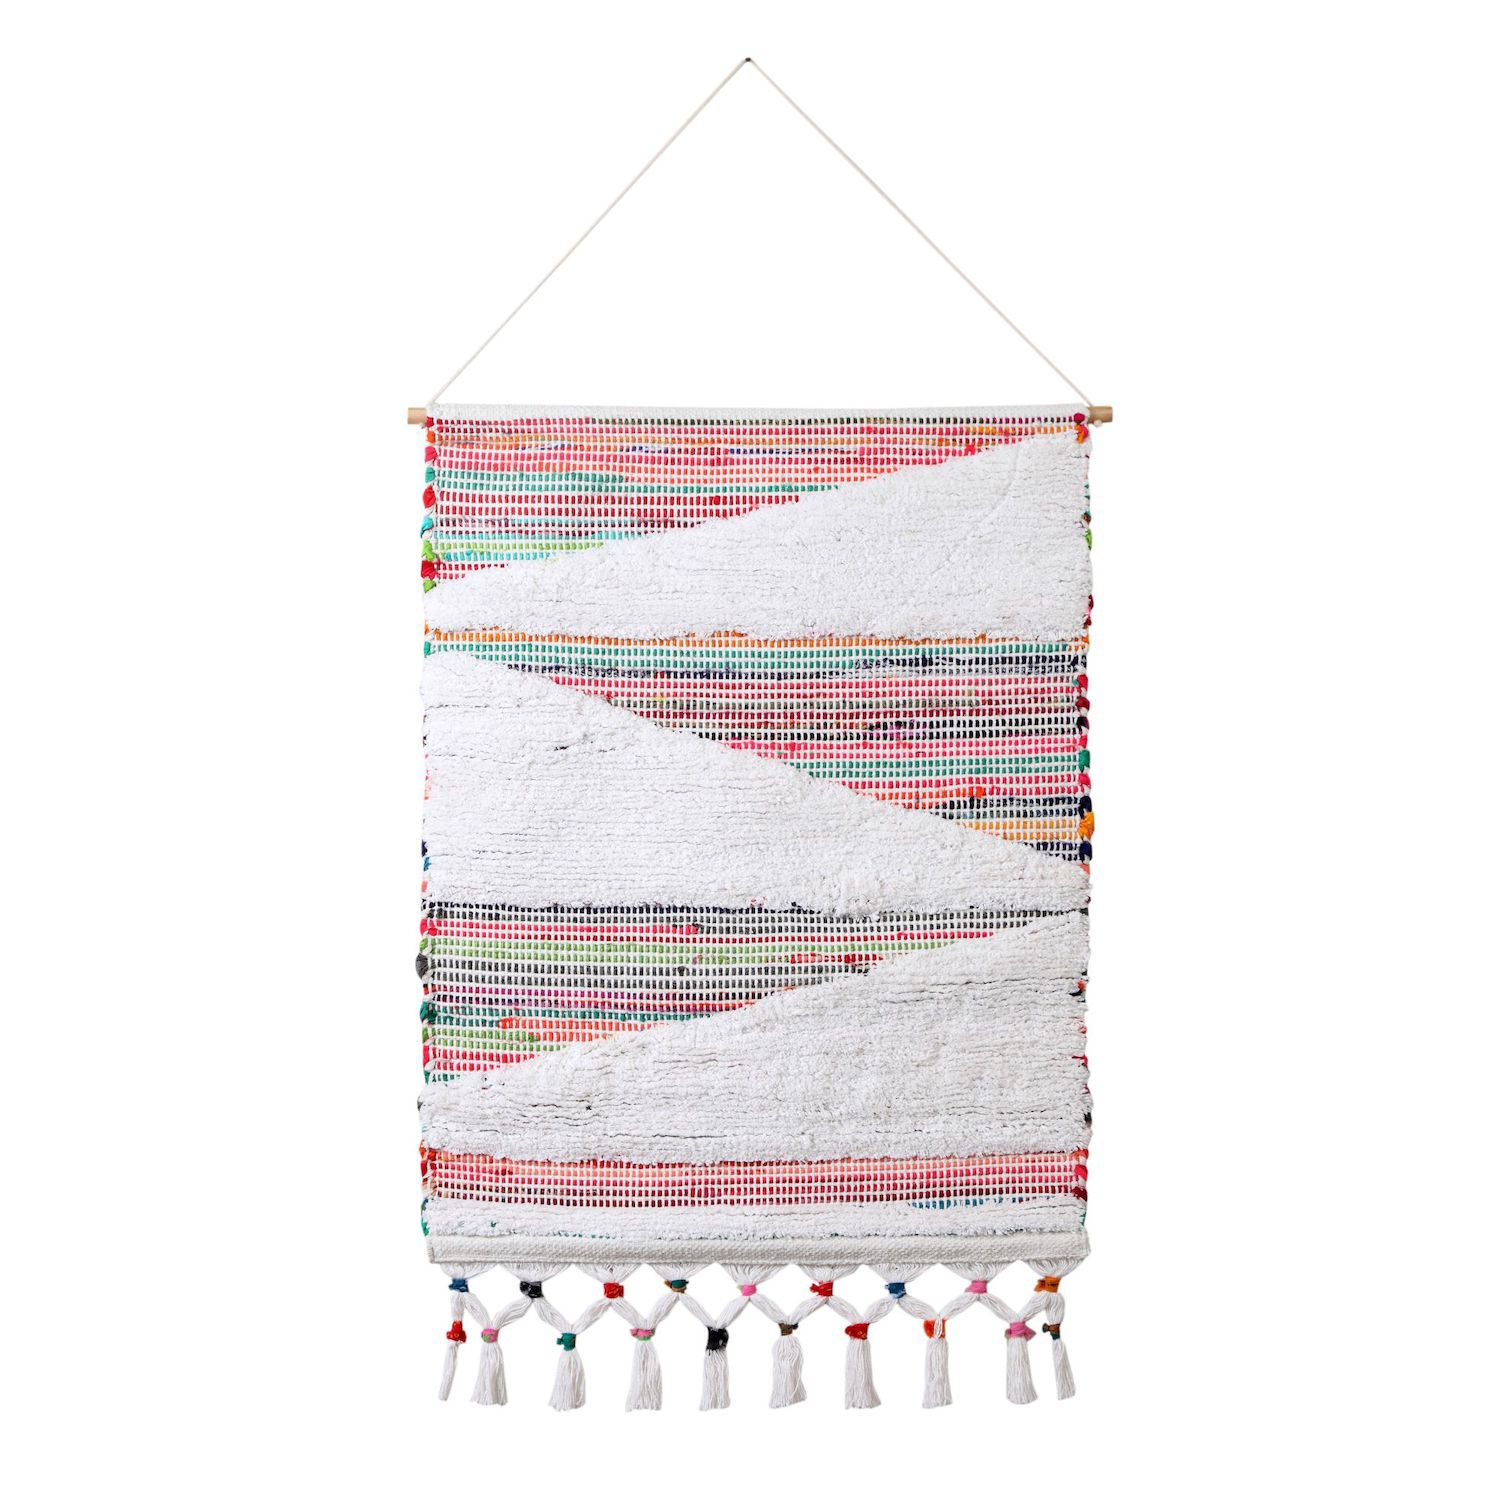 Caralarga Chimalli Tapestry Wall Hanger – White Label Project